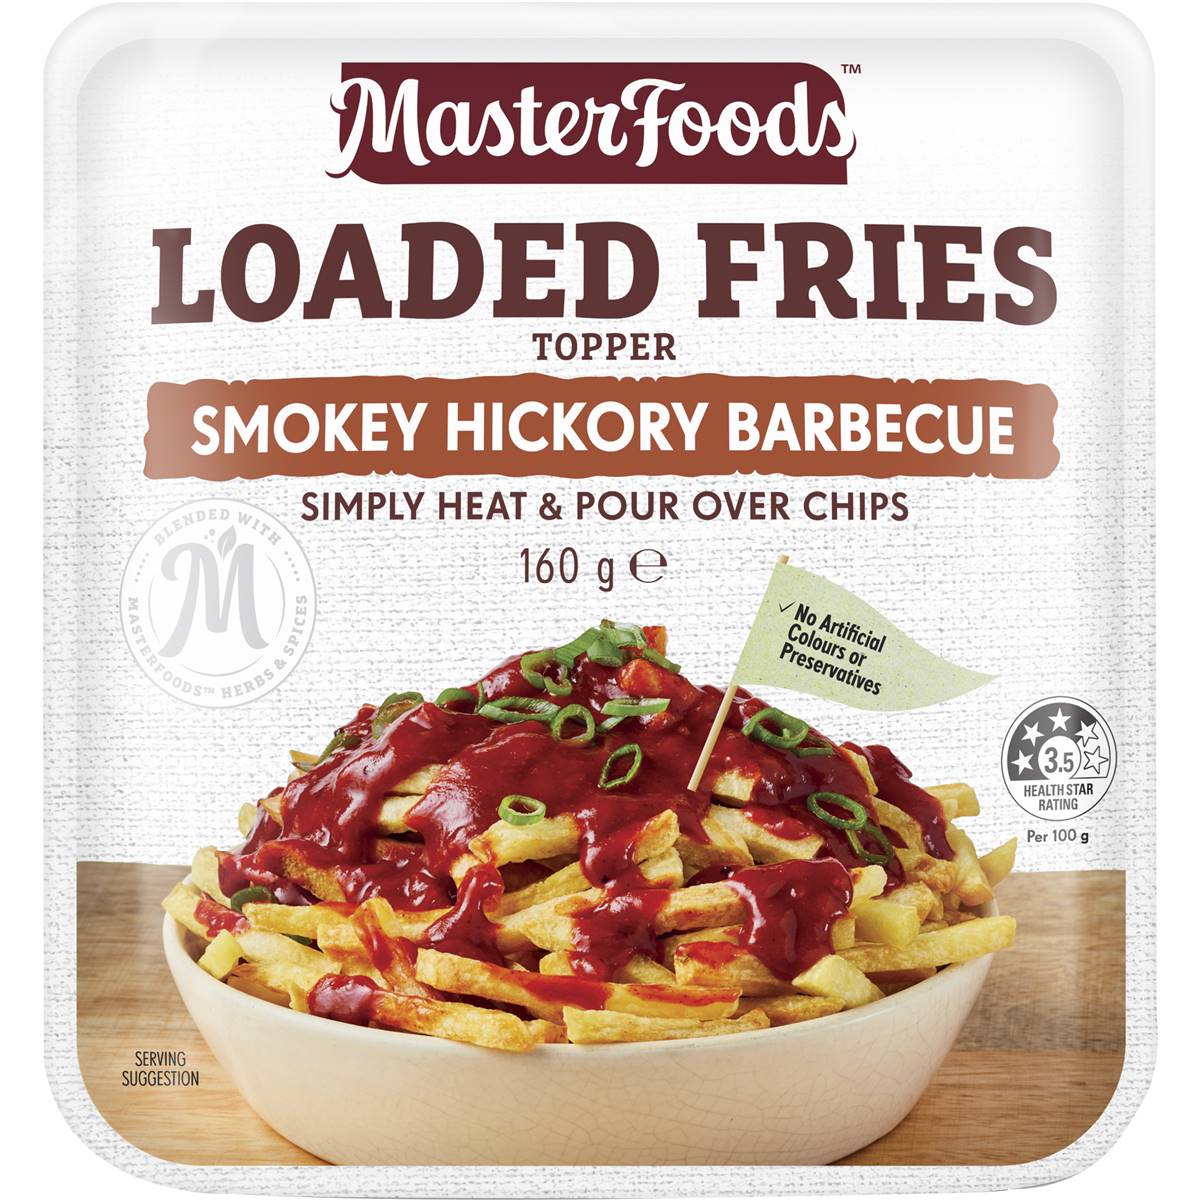 Calories in Masterfoods Loaded Fries Topper Smokey Hickory Barbecue